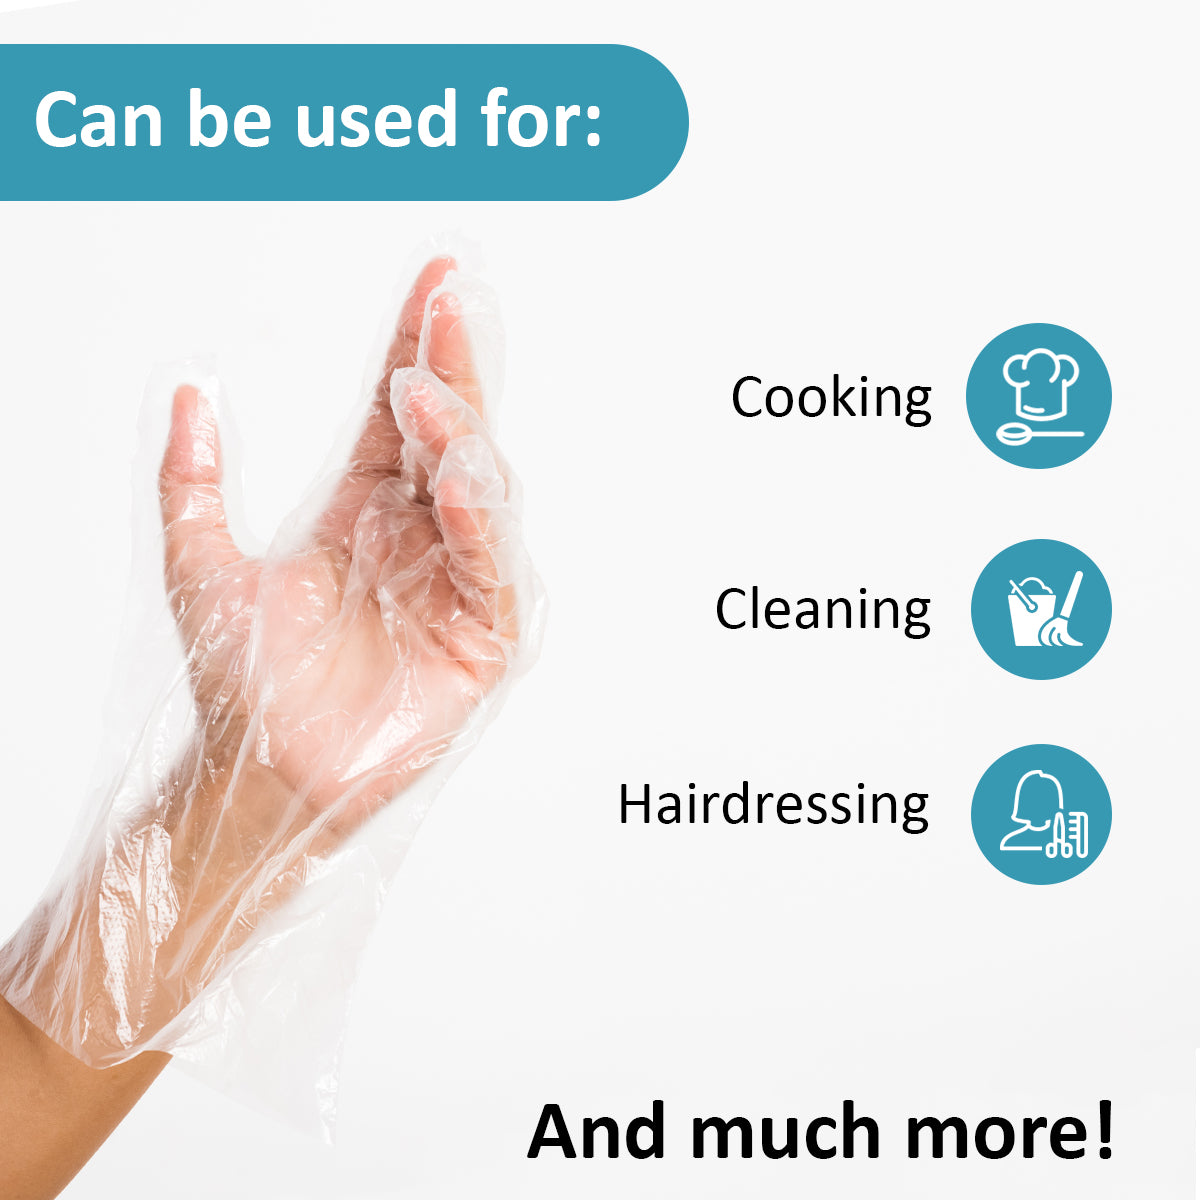 10,000pk Disposable Plastic Gloves – For Food Service & Cleaning